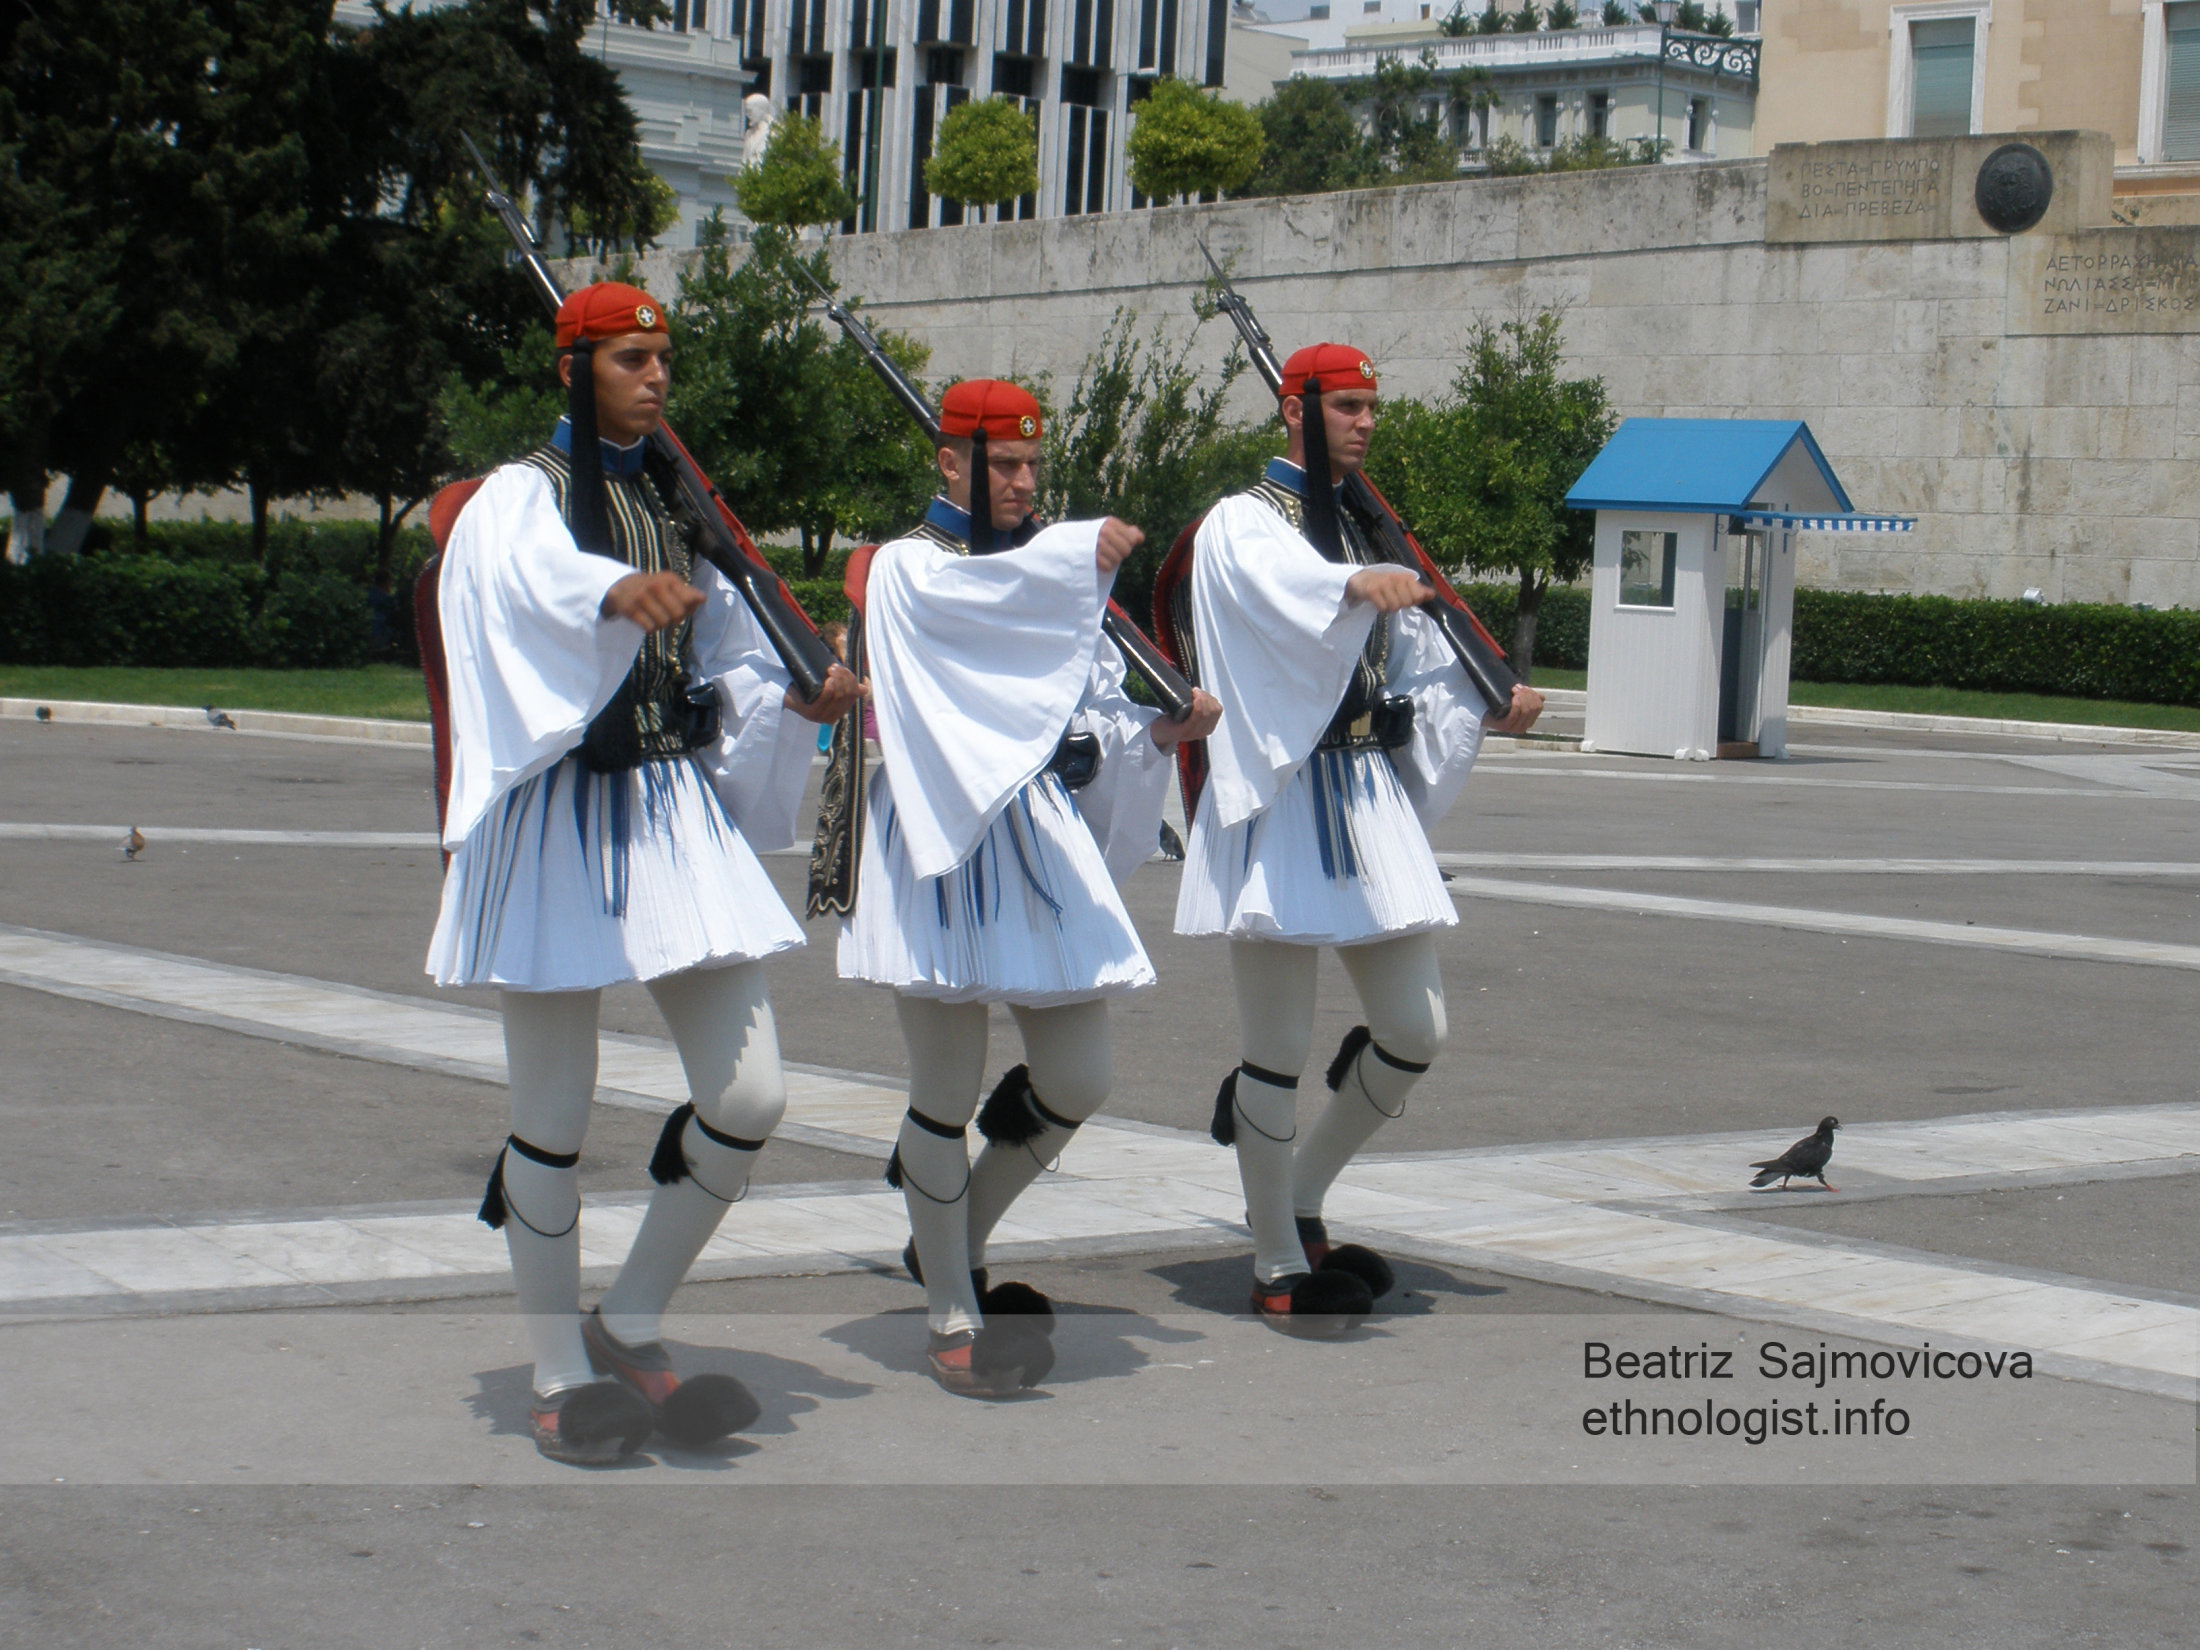 The honour Guard in Greece